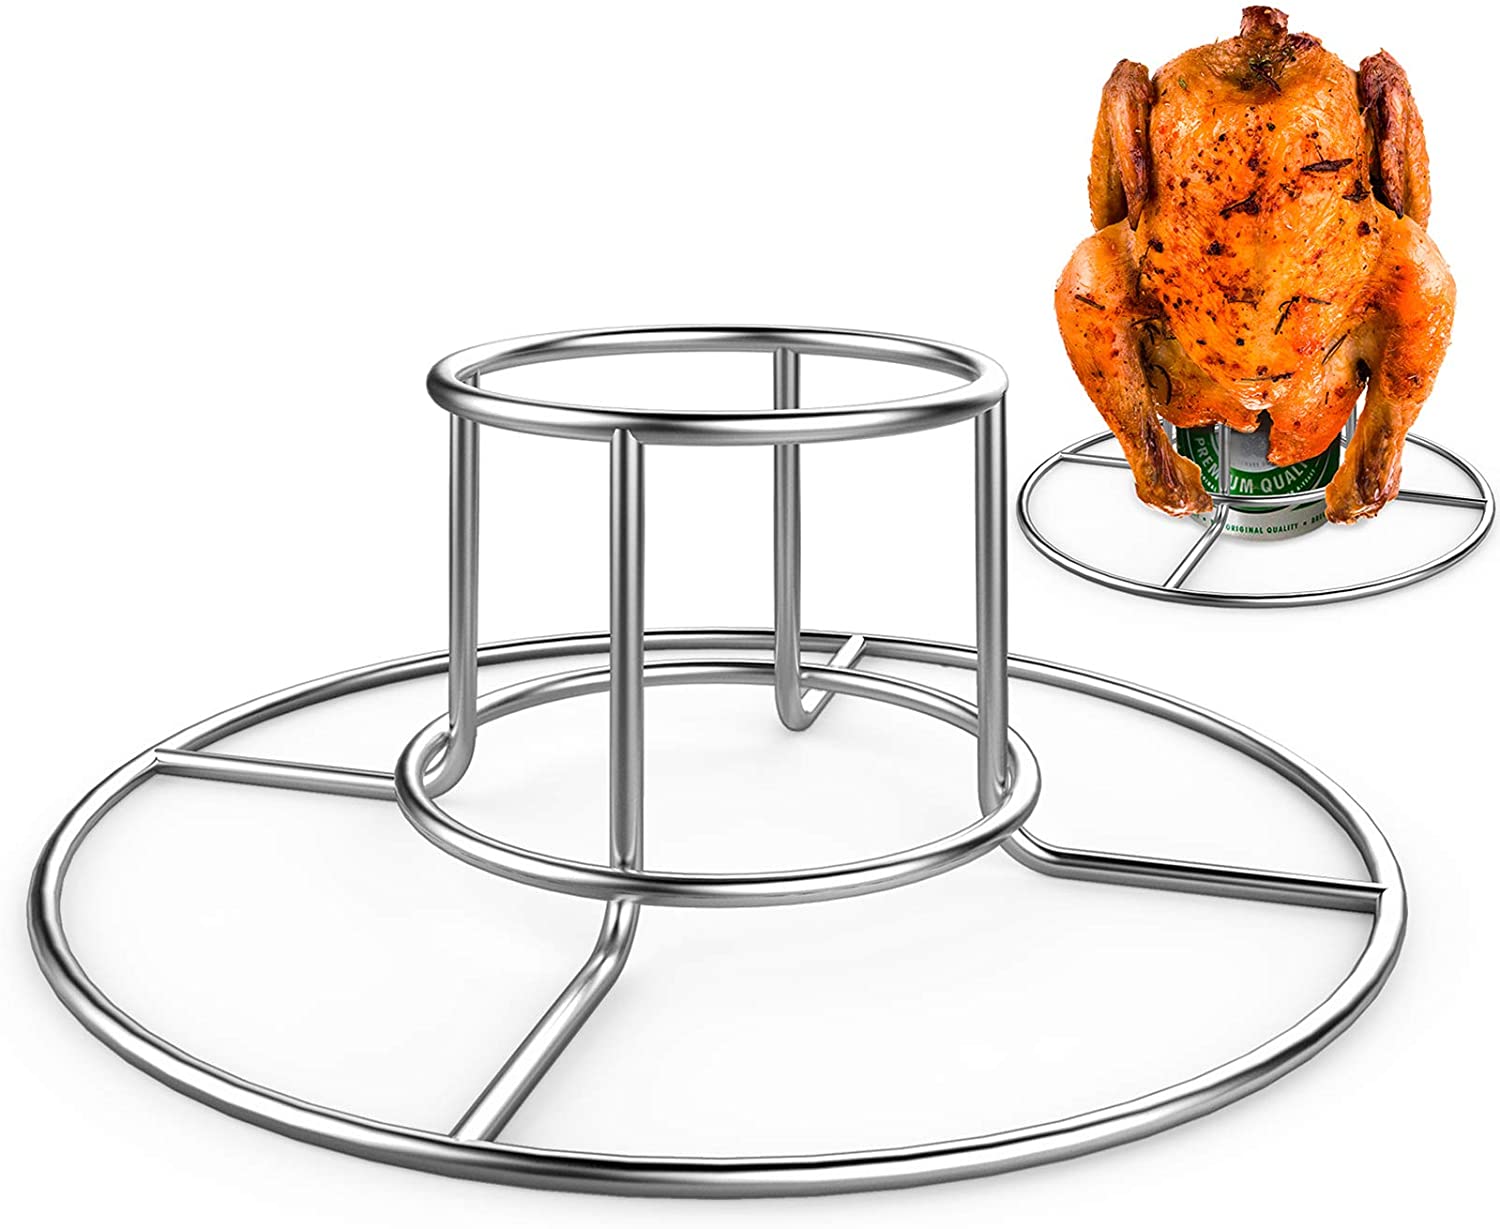 Beercan Chicken Rack, Stainless Steel Chicken Stand for Smoker and Grill